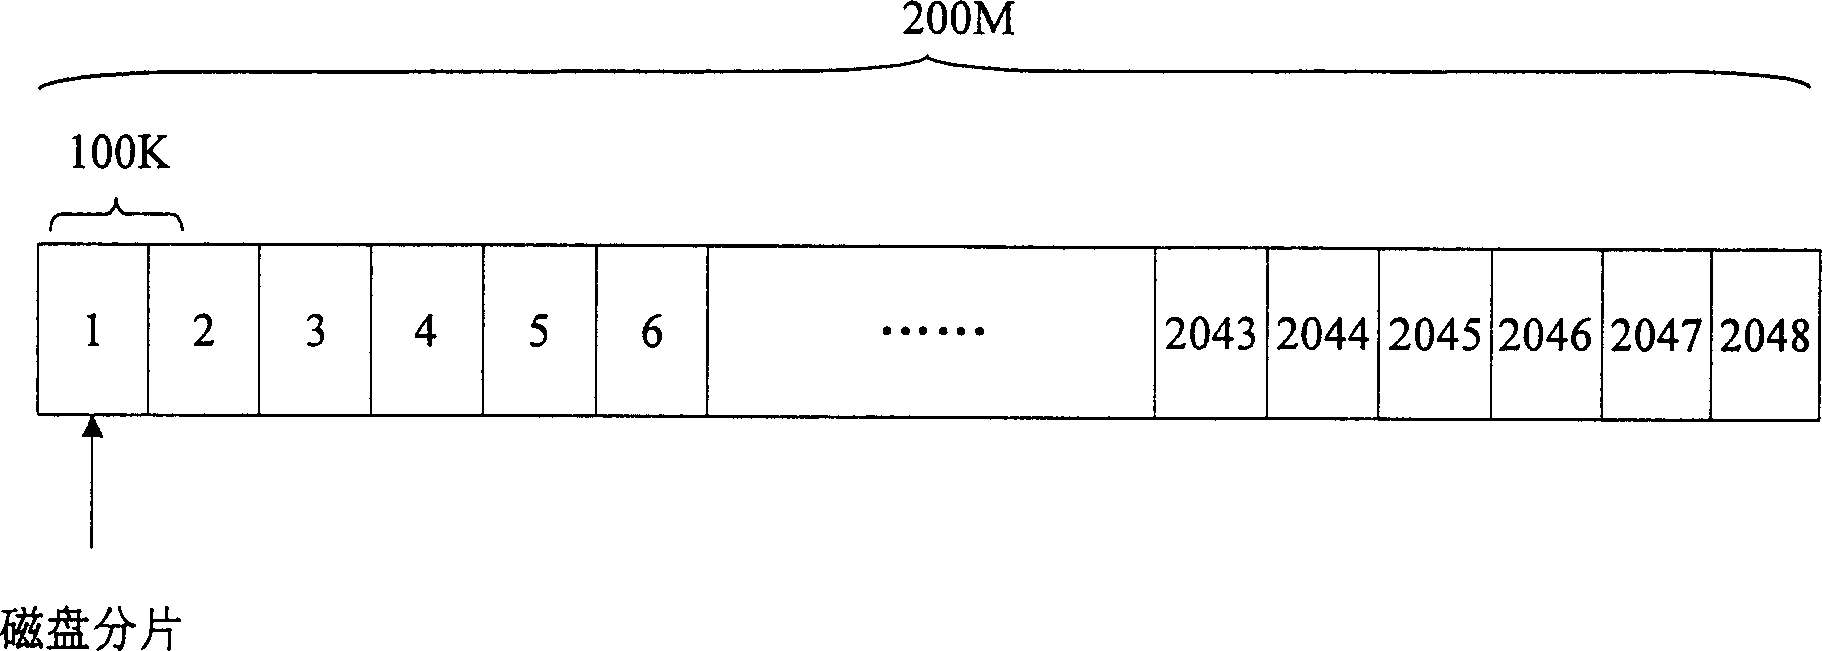 Disk buffering method in use for video on demand system of peer-to-peer network